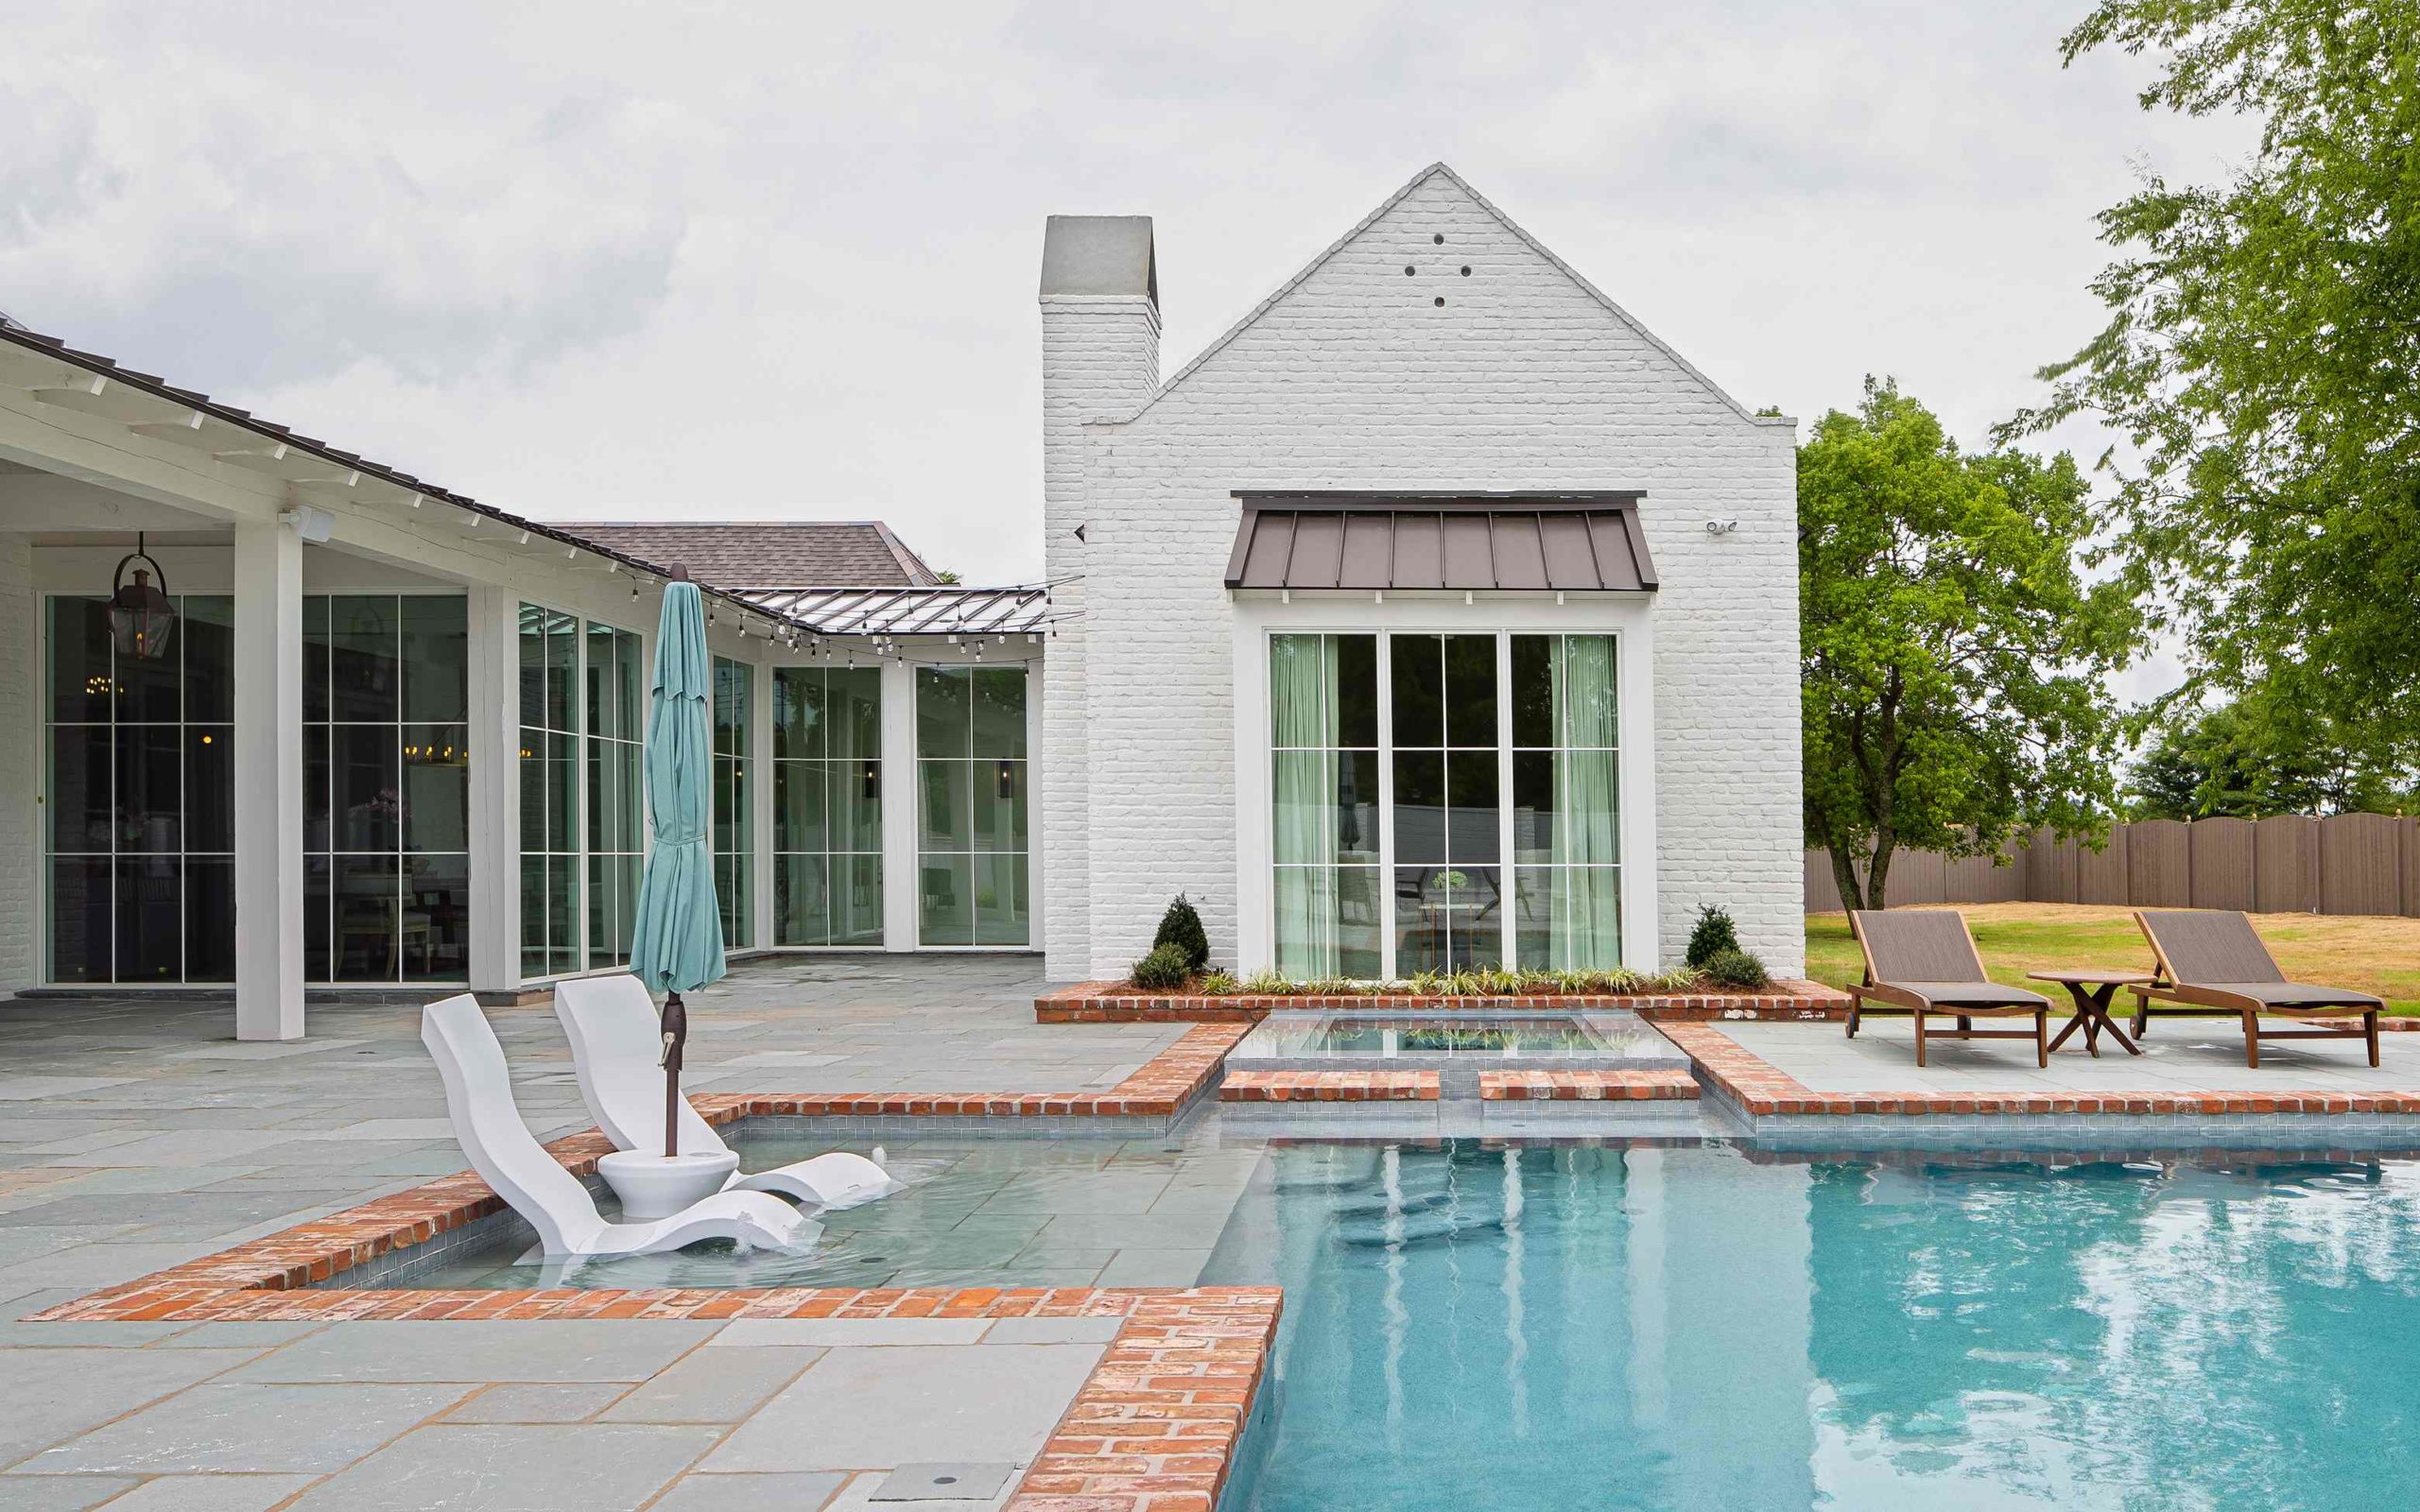 Exterior view of the back patio and pool at Oak Alley, a custom home designed and built by Farmer Payne Architects.